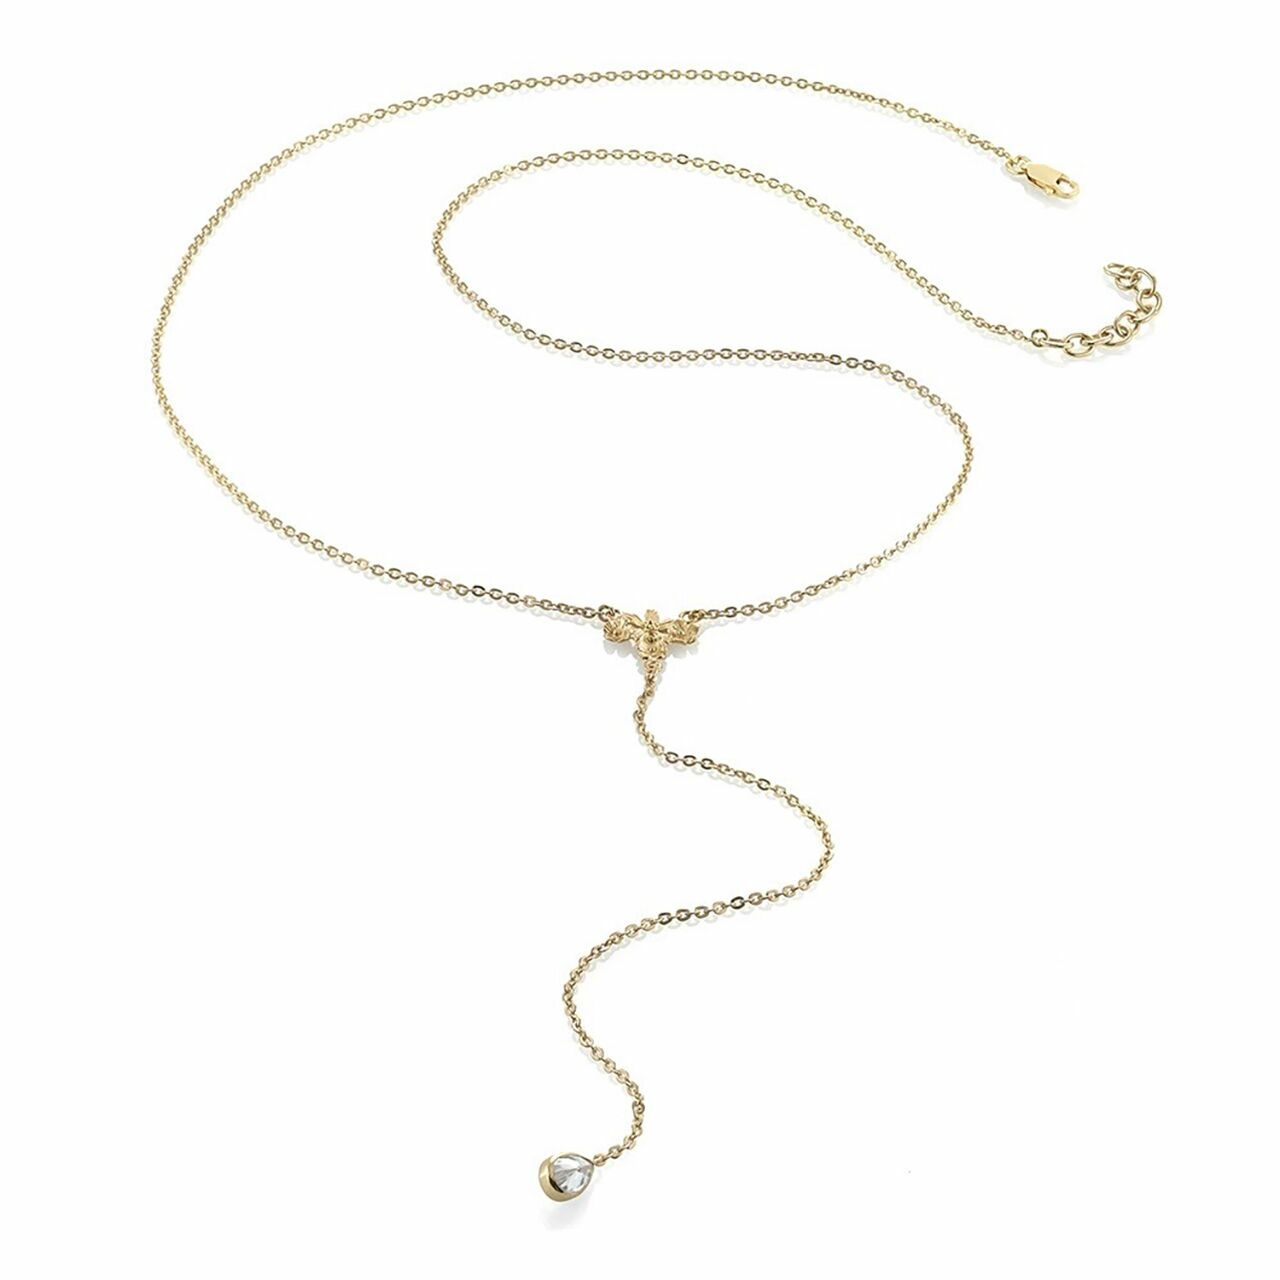 Puspanjali Long Necklace With Crystal Dangle Gold Dip